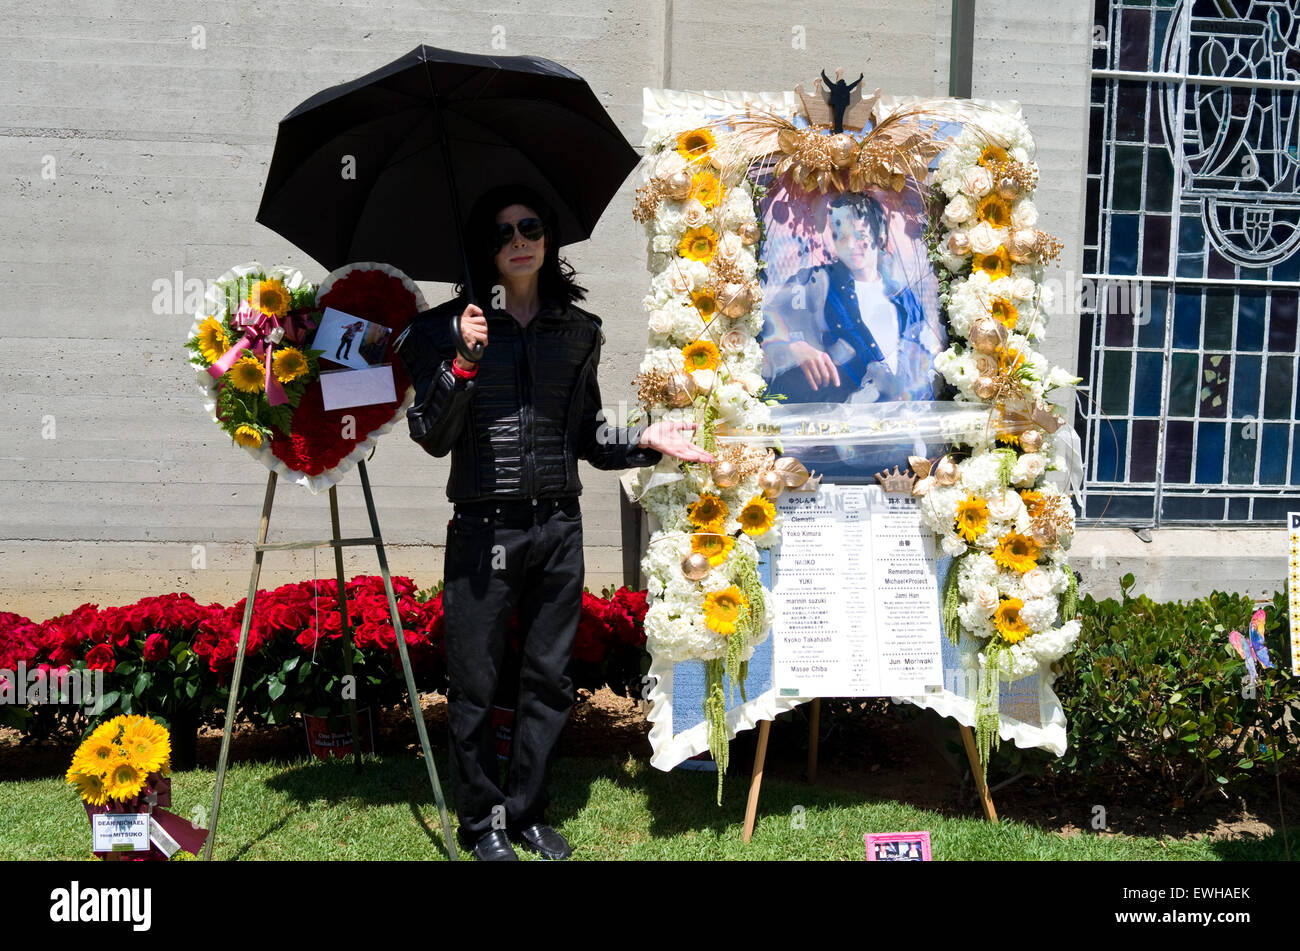 Glendale, California, USA. 25th June, 2015. A Michael Jackson impersonator poses near Michael Jackson's grave in the Forest Lawn Memorial Park in Glendale, California, USA, 25 June 2015. Photo: Marcus Teply/dpa/Alamy Live News Stock Photo